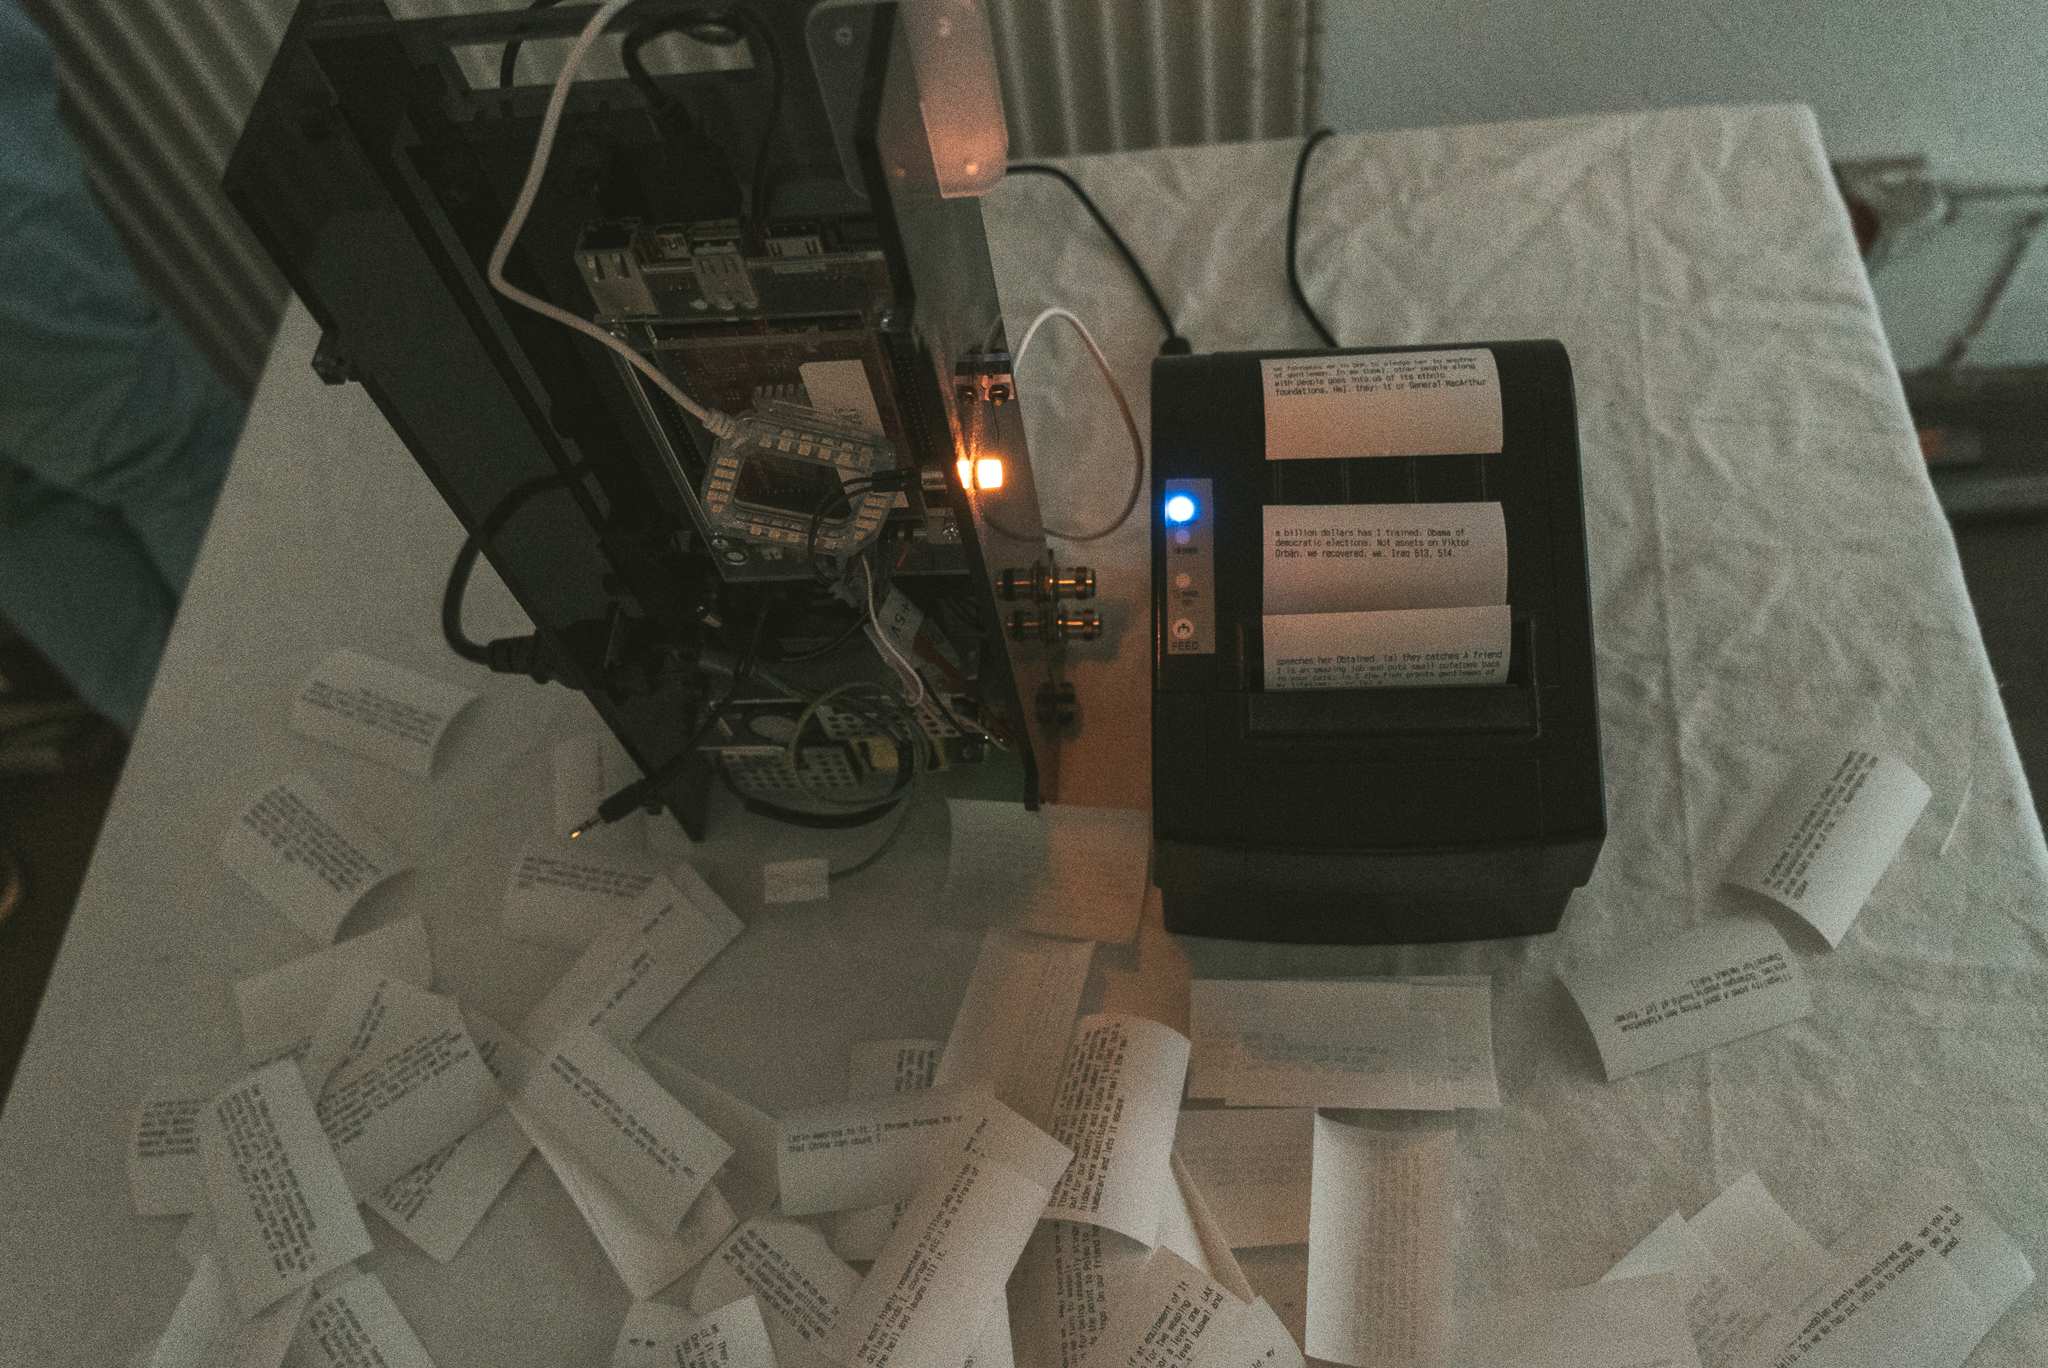 A Machine with many printed stories on 80mm slips of paper